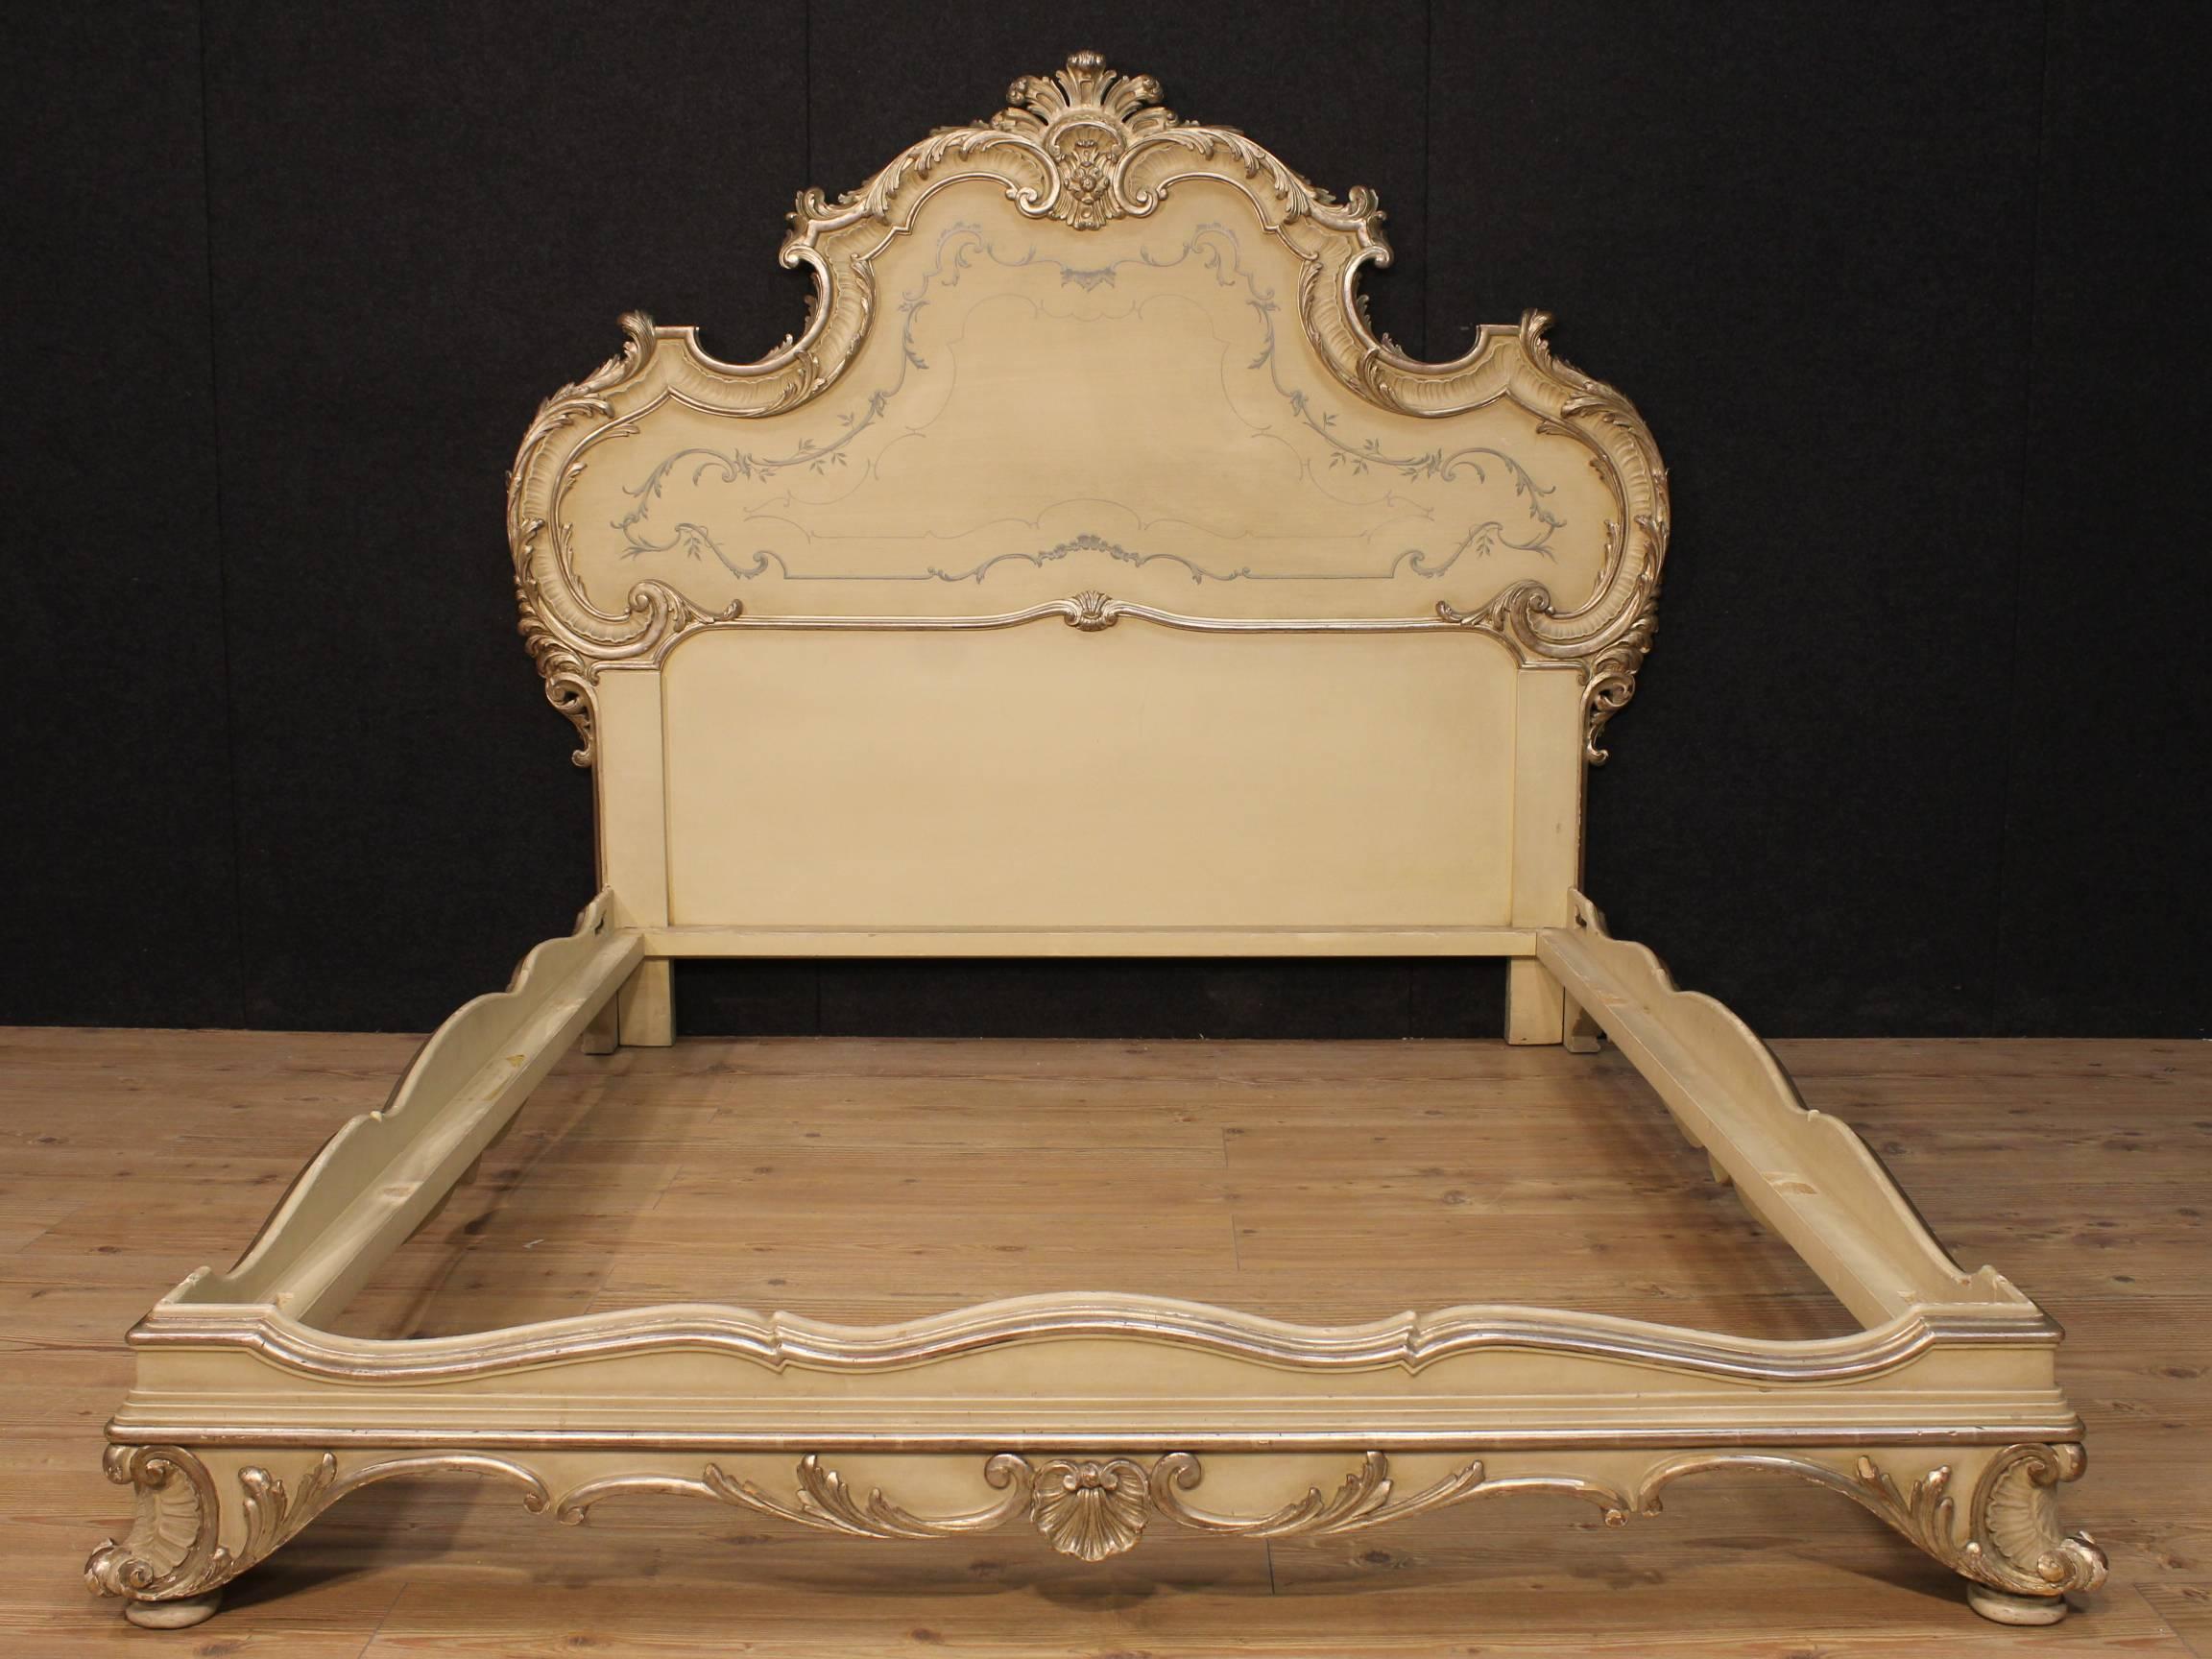 Spectacular Venetian bed of the 20th century. Furniture of high quality made by ornately carved, lacquered and painted by hand wood of fabulous decoration and good taste. Bed that can hold a mattress of the following measures: W 142 cm x P 183 cm.